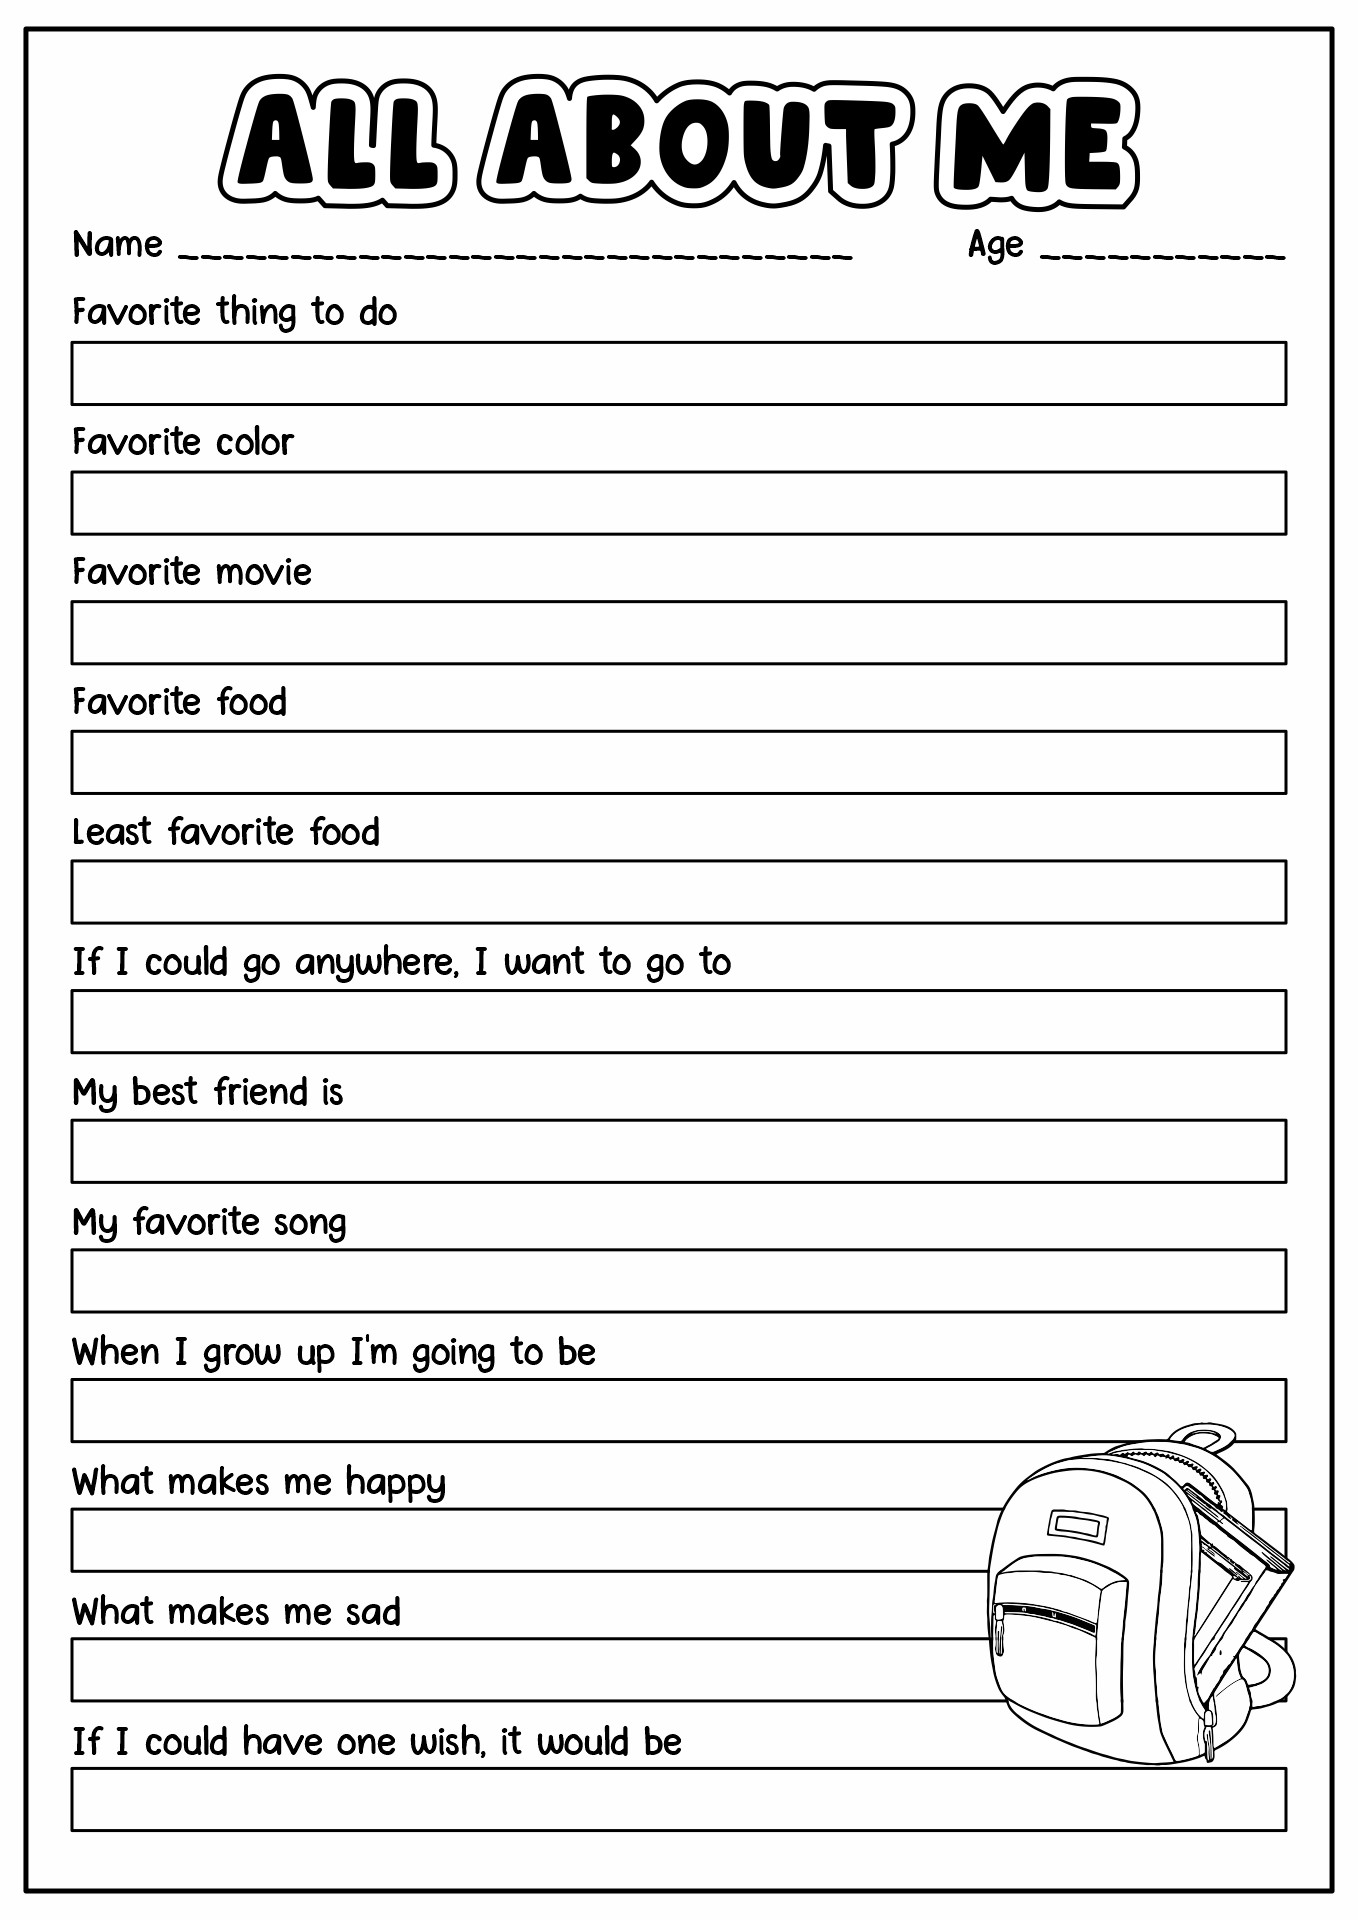 Printable All About Me Questions